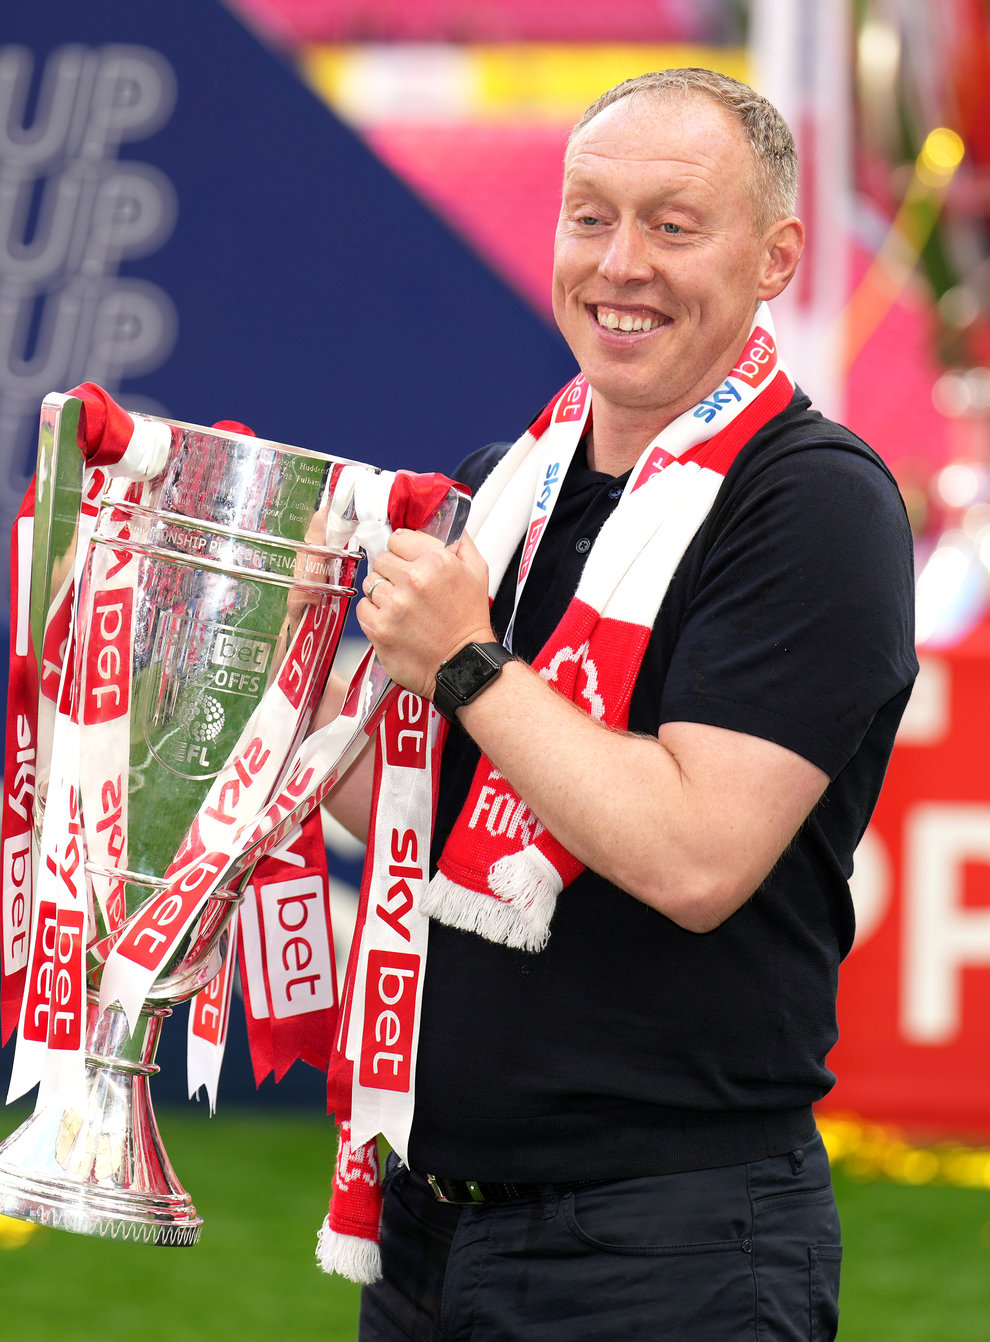 Nottingham Forest manager Steve Cooper celebrates with the trophy after victory in the Championship play-off final (John Walton/PA)